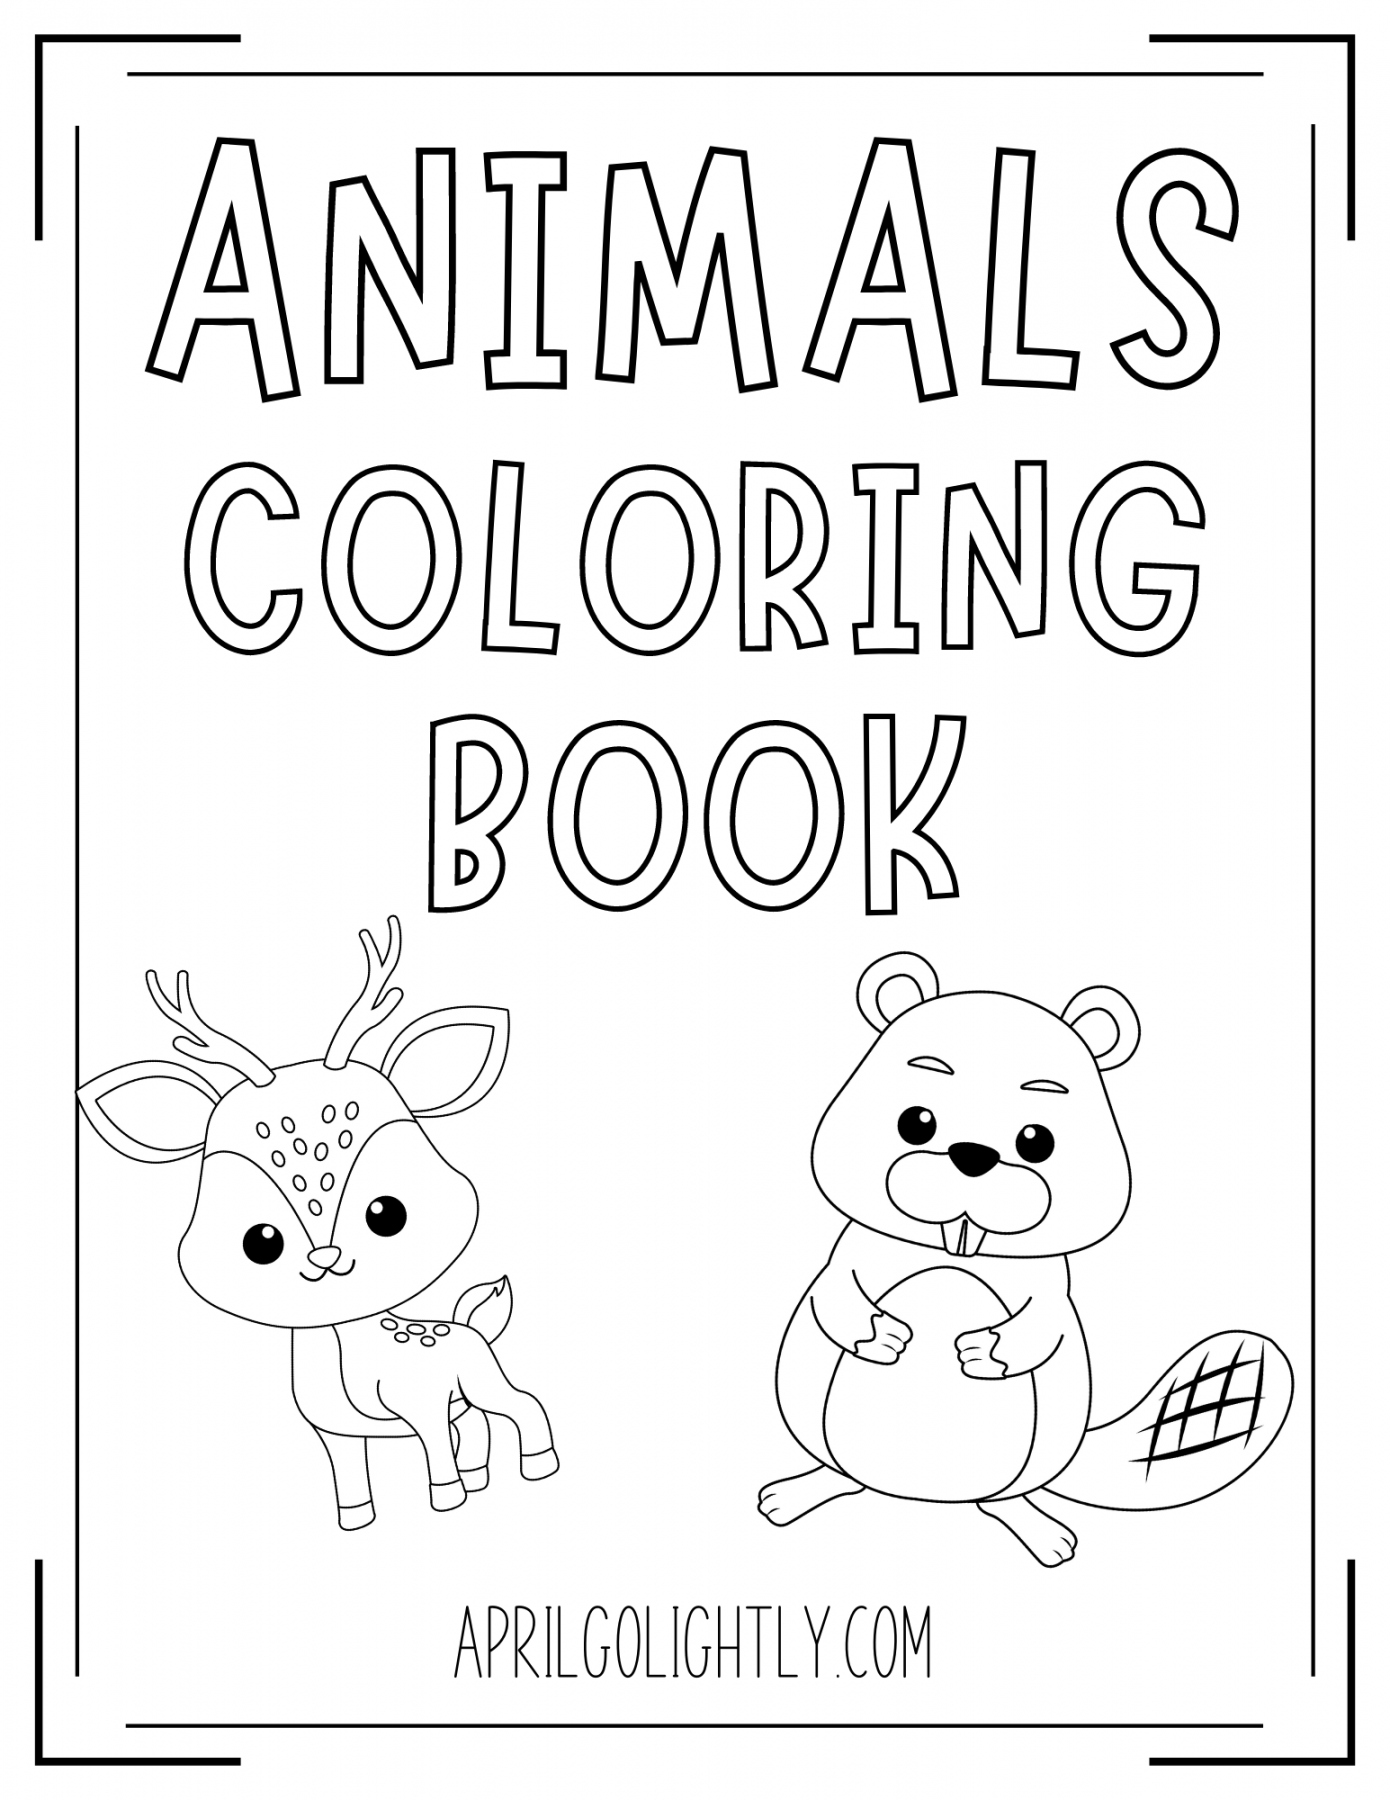 Free Printable Coloring Pages Animals - Printable - FREE Printable Animals Coloring Book - April Golightly